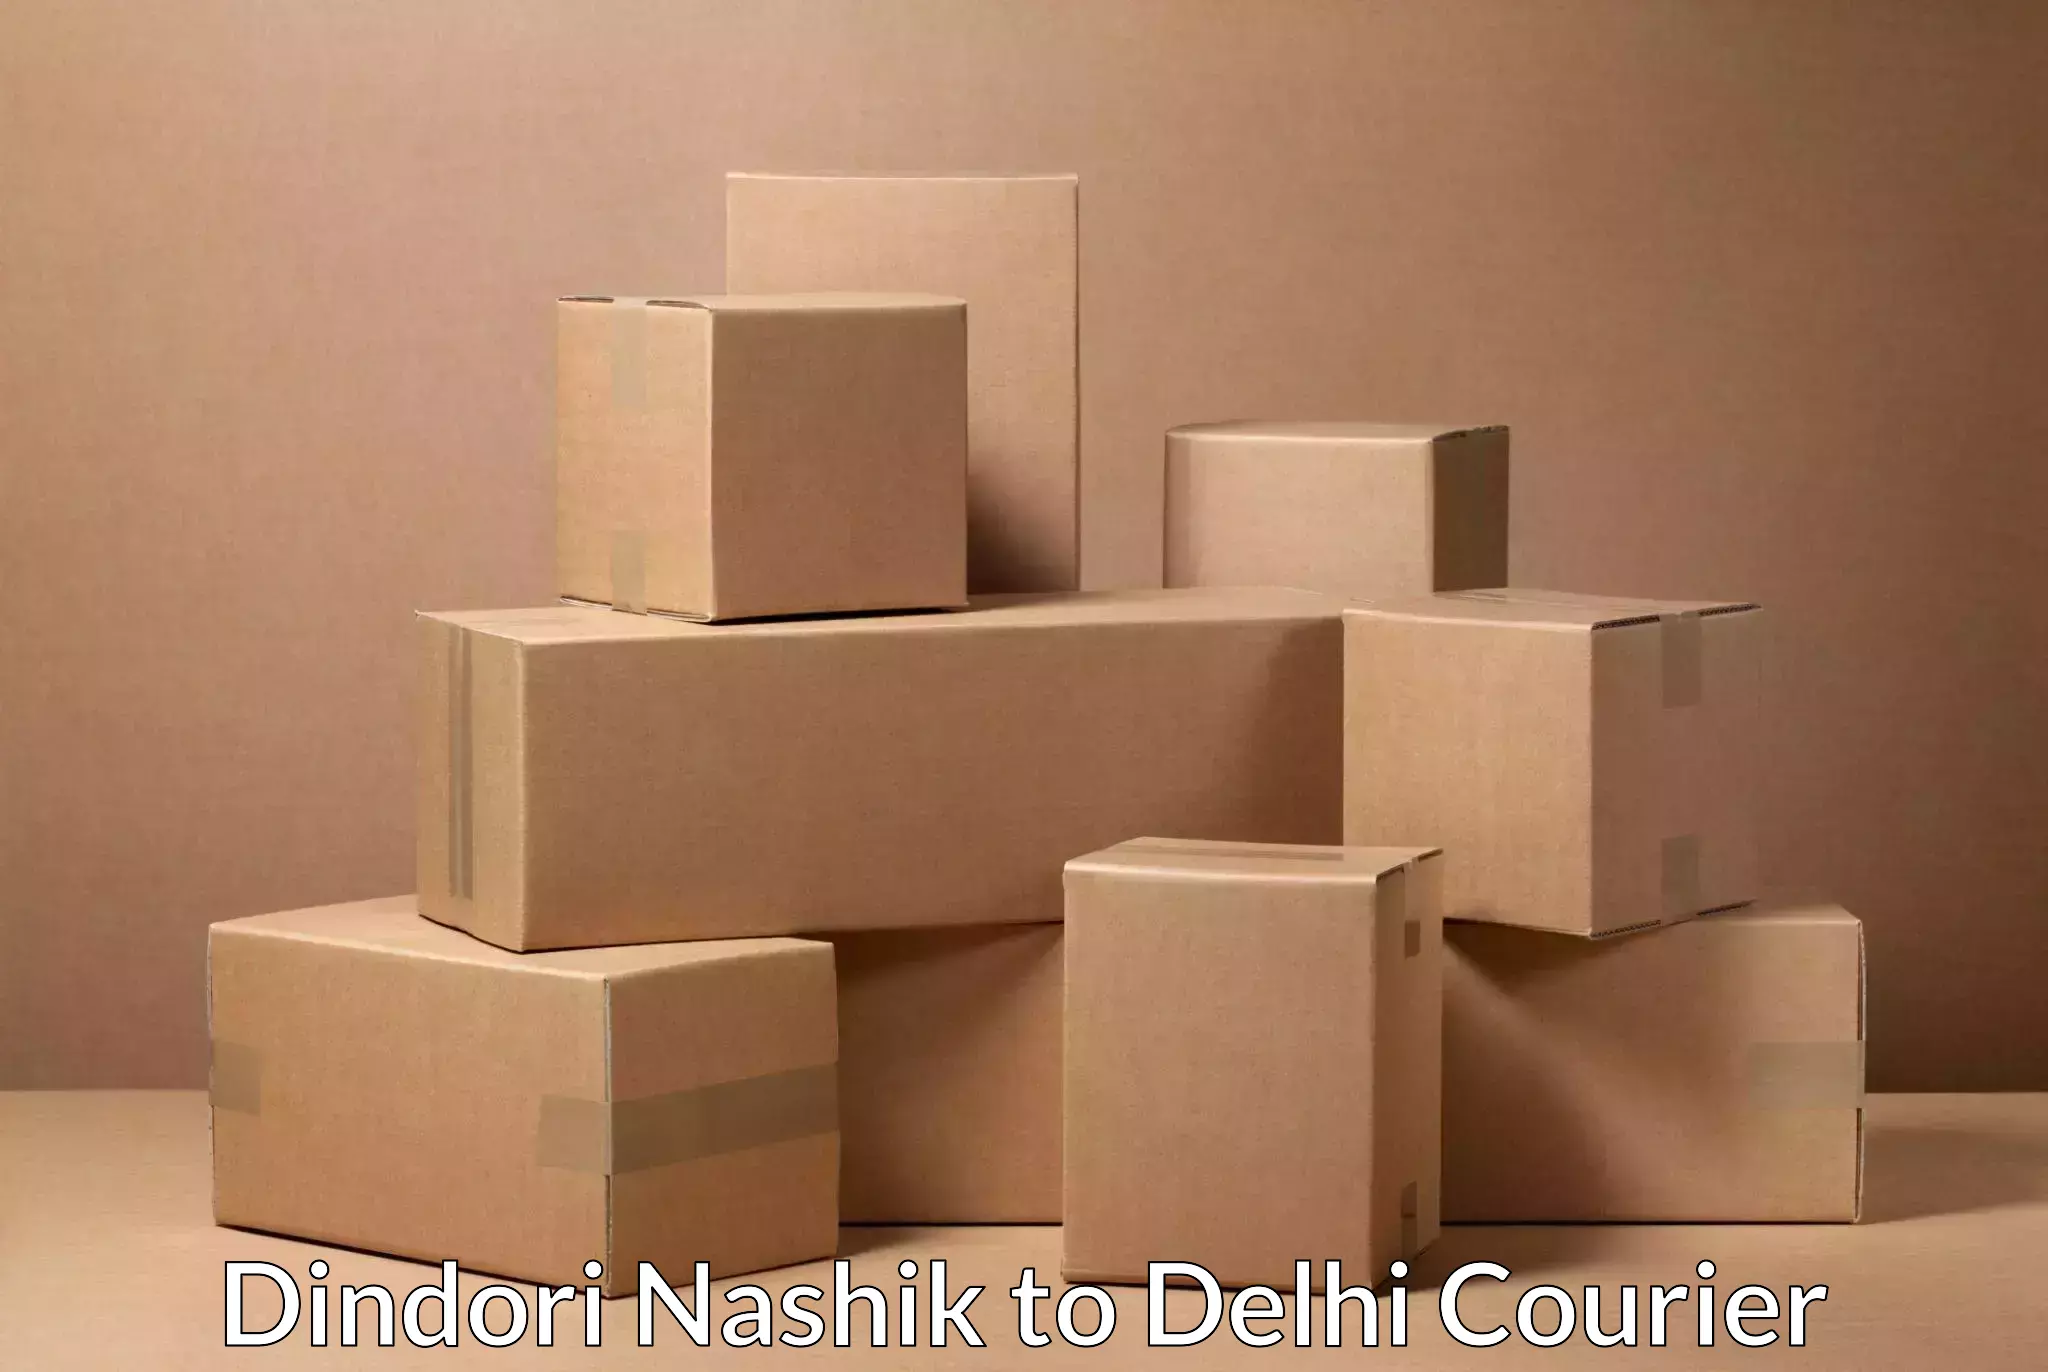 Customized delivery solutions in Dindori Nashik to IIT Delhi